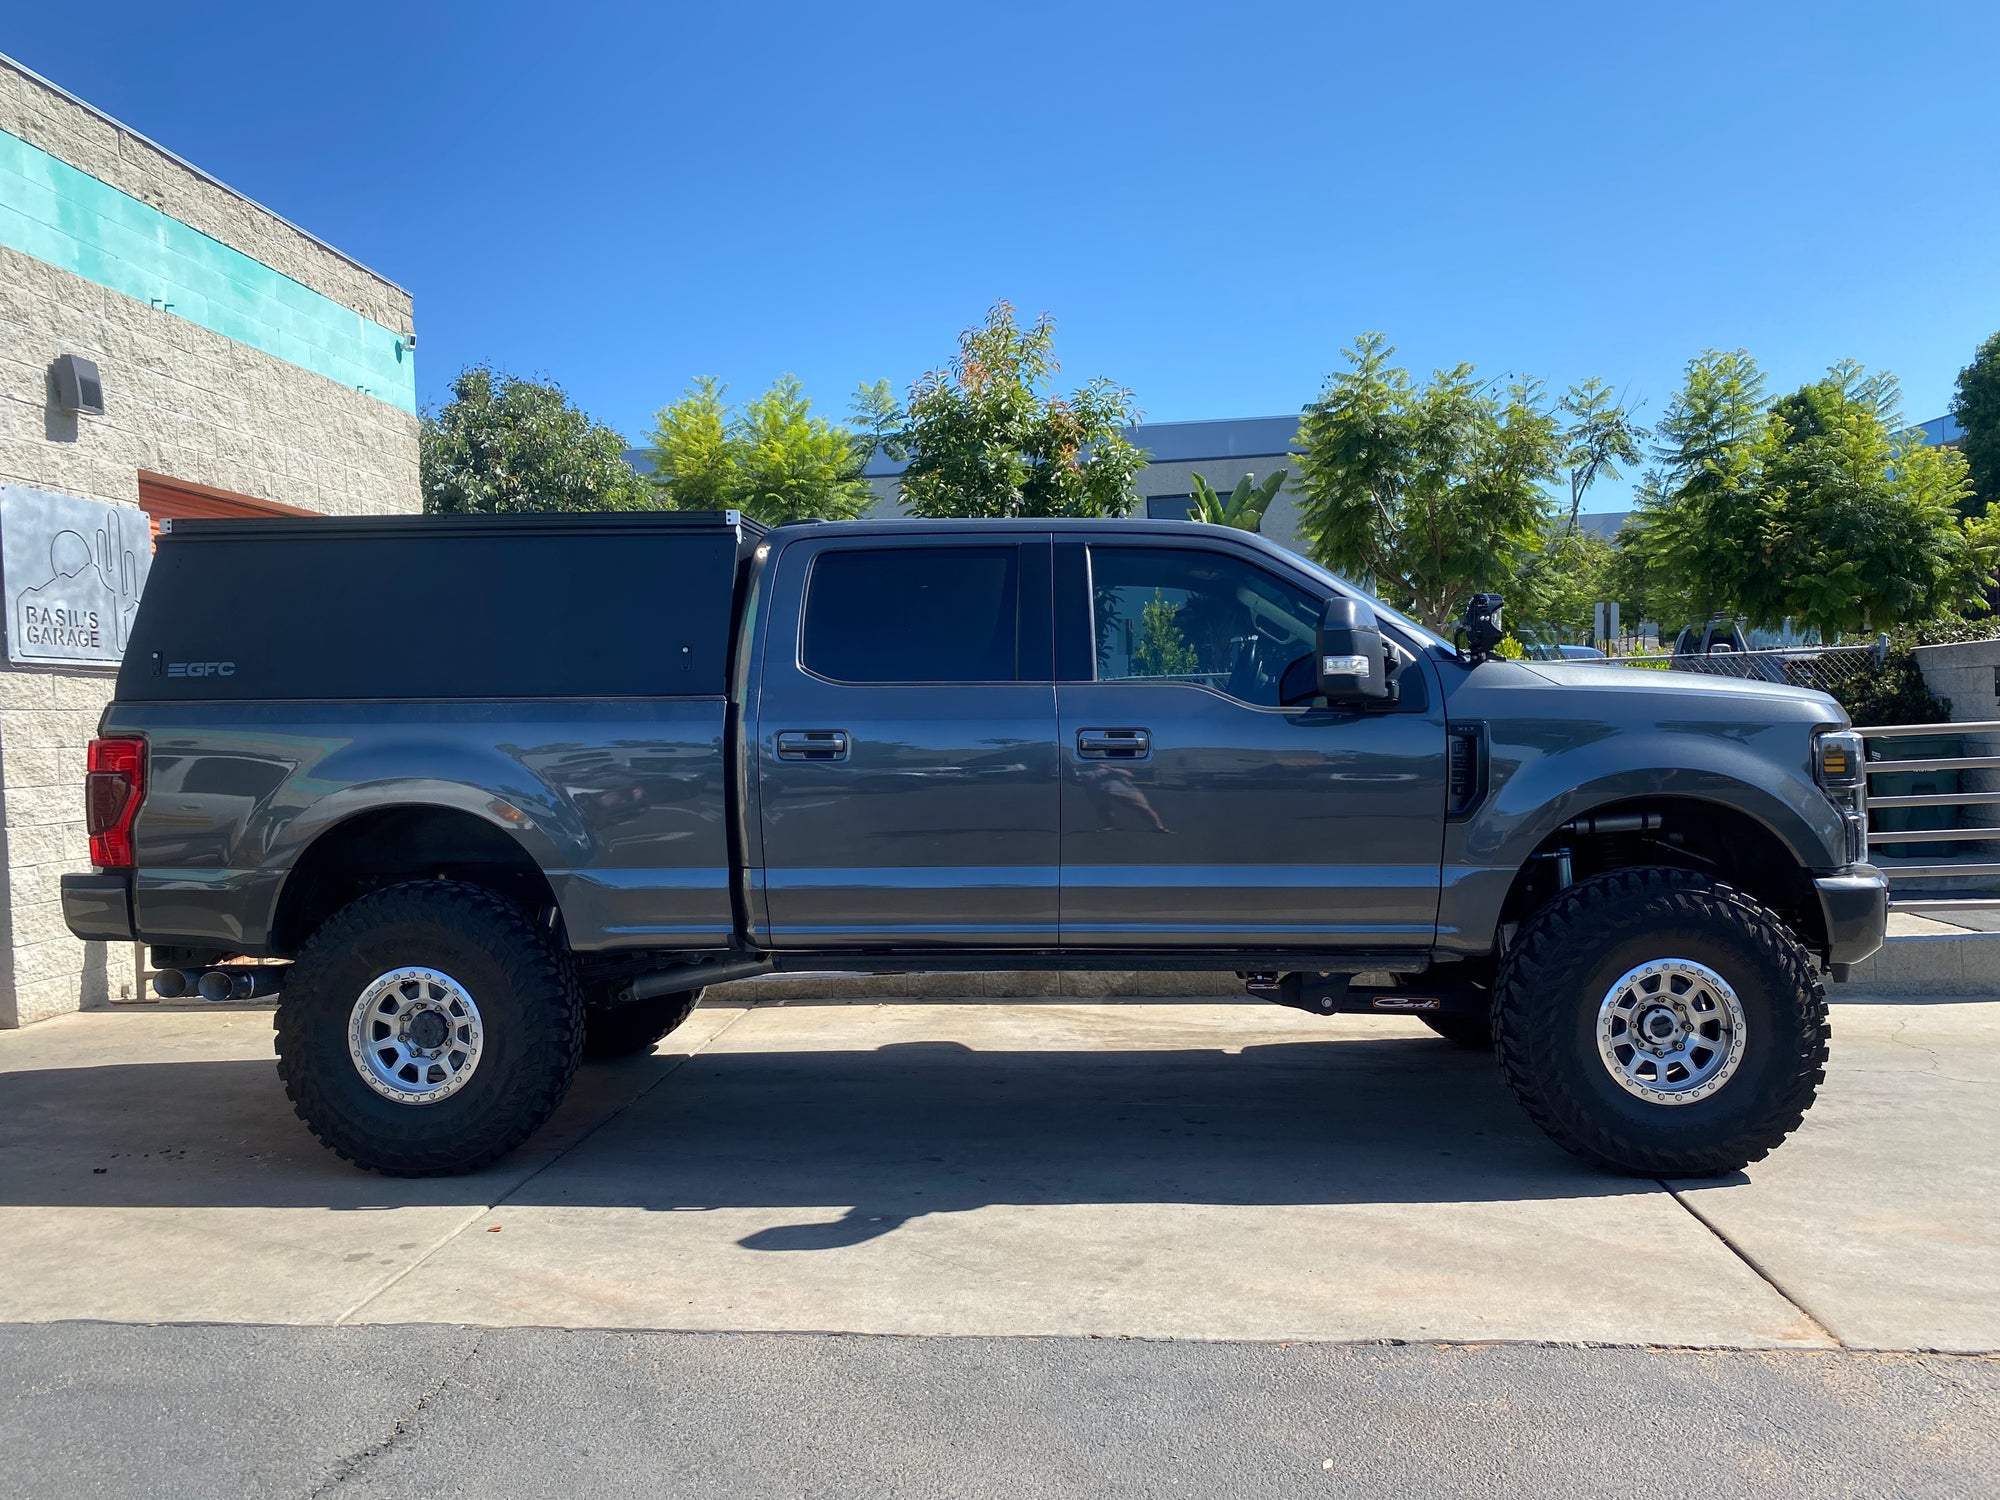 2020 Ford F250 Topper - Build #374